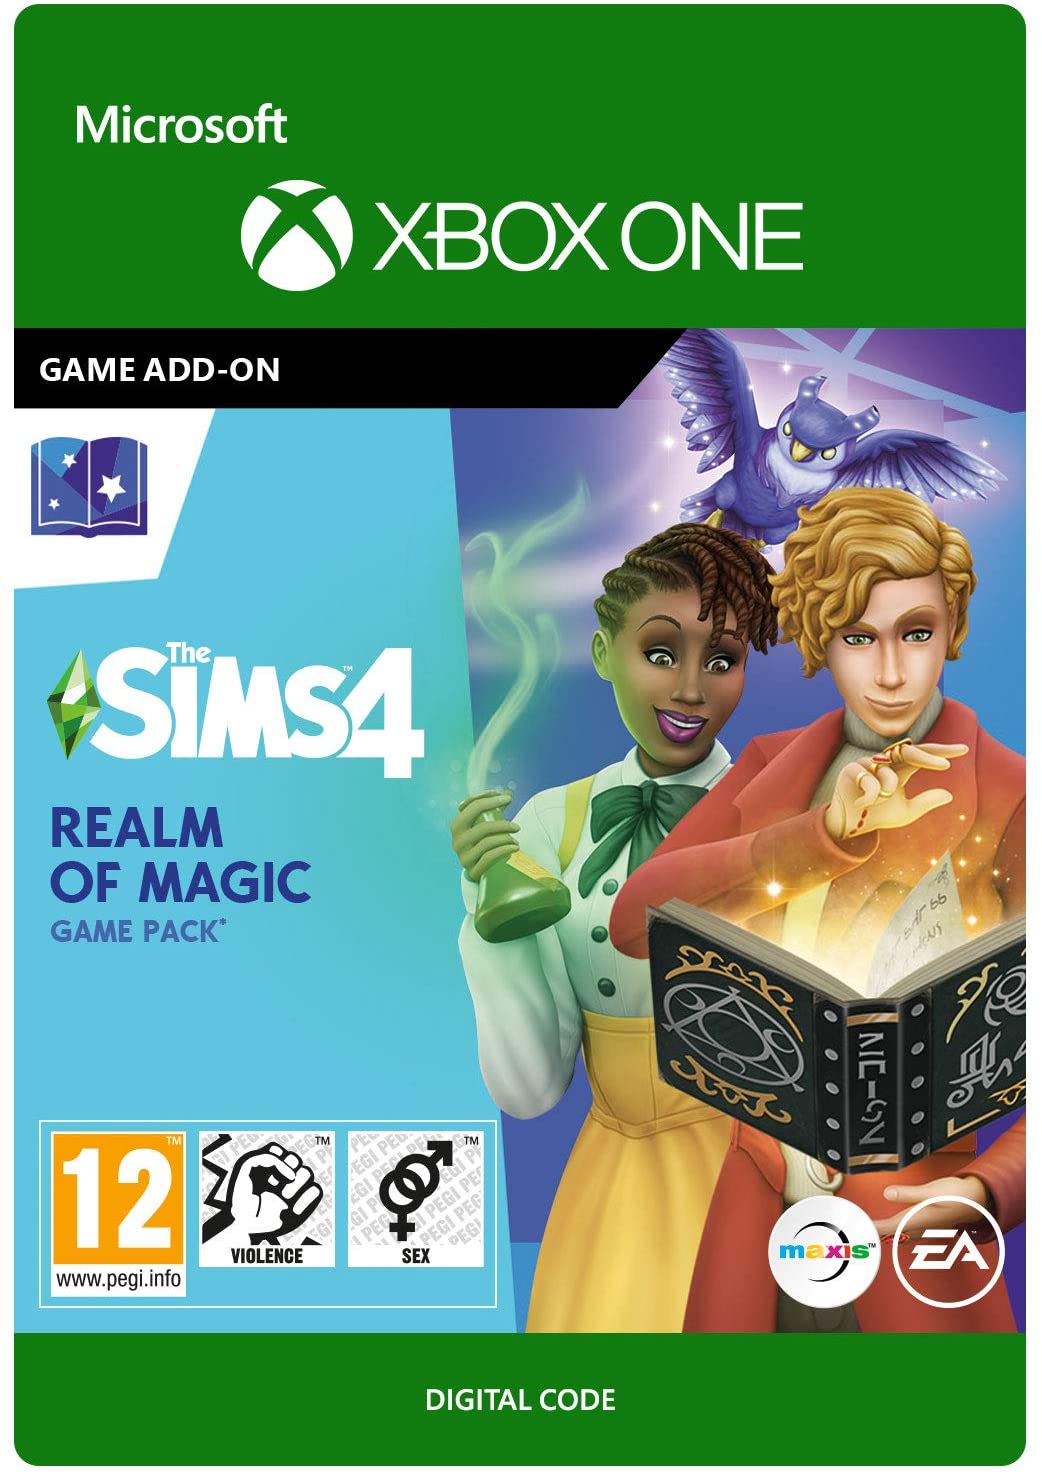 The Sims 4: Realm of Magic Digital Download Key (Xbox One): USA